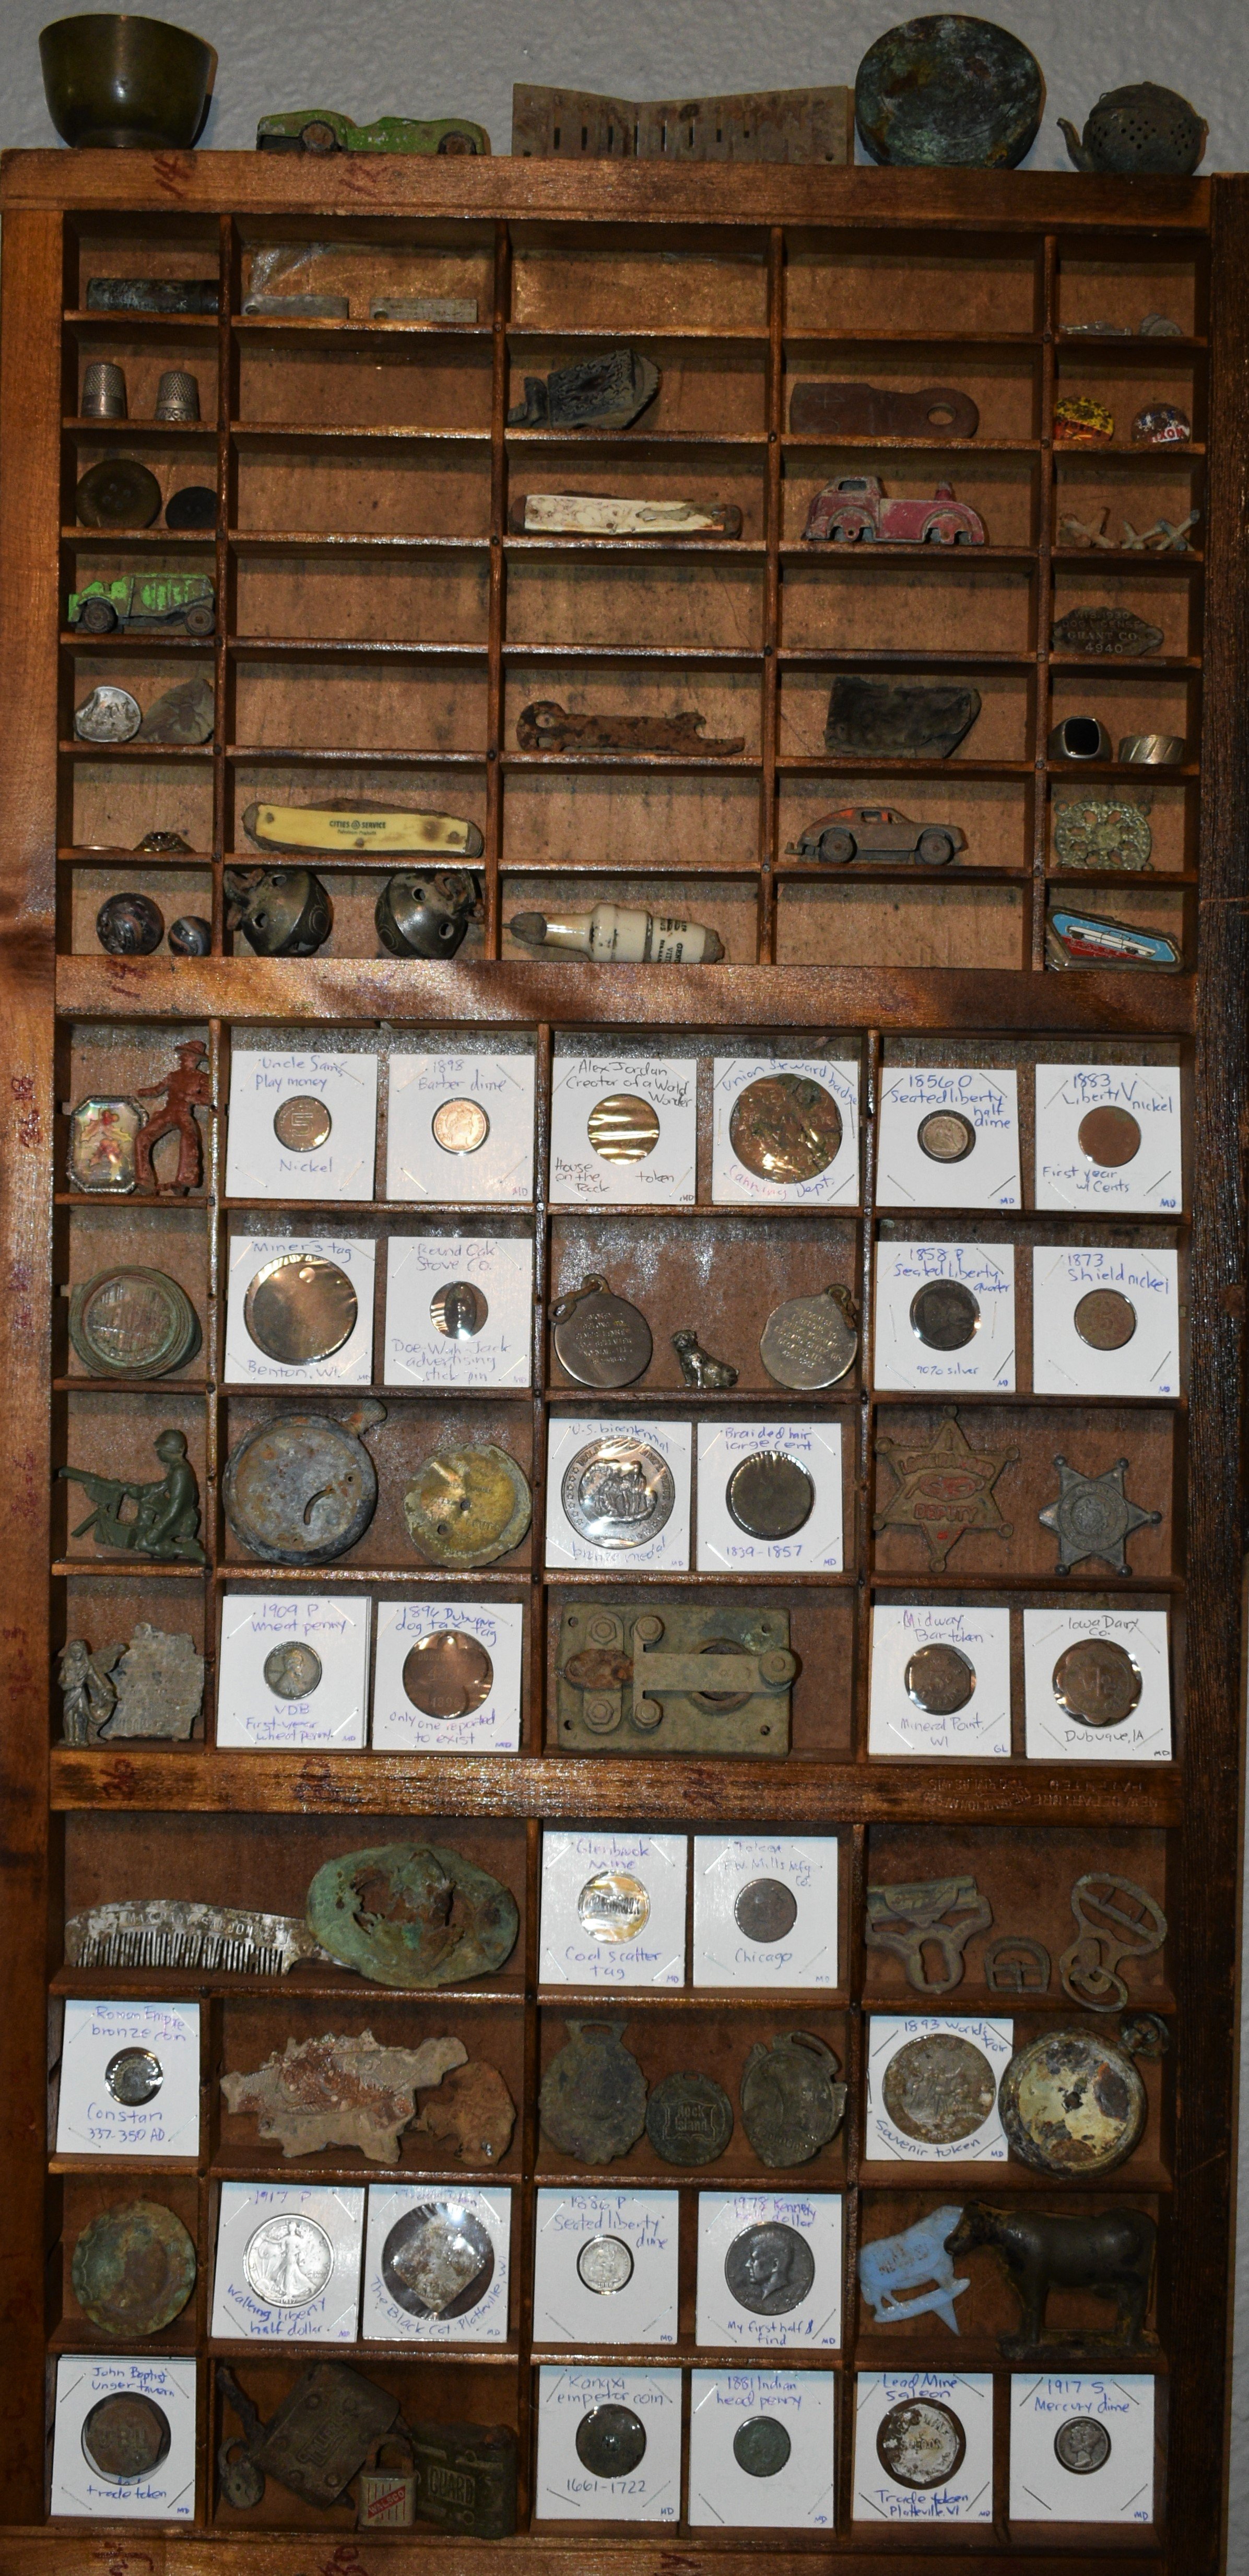  Just a few of Jim’s metal detecting history pieces. 